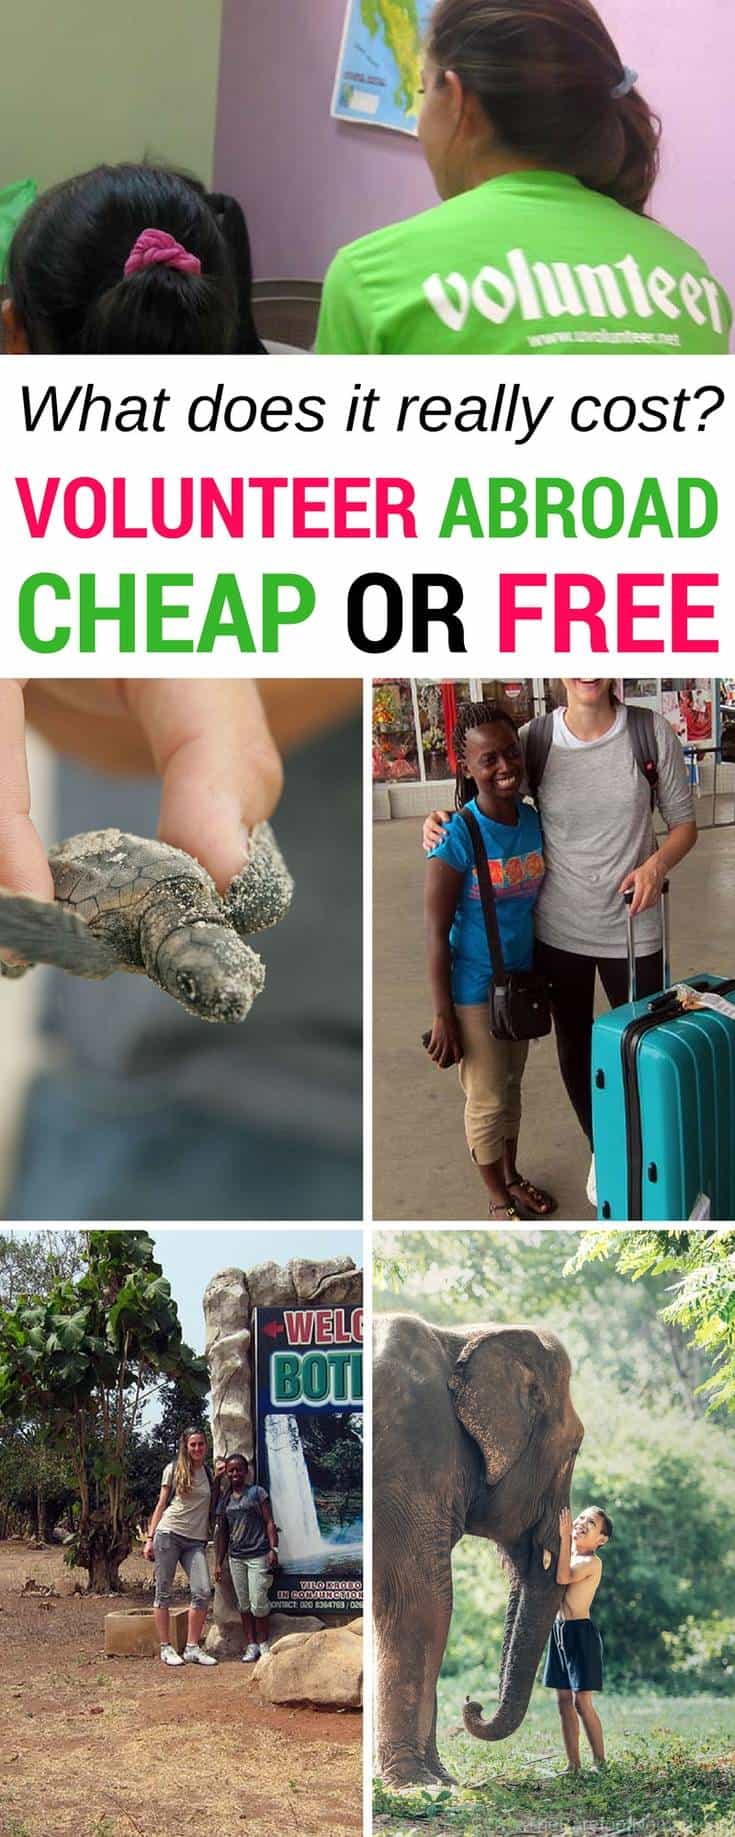 Do you want to volunteer abroad and travel, but you're worried about the cost? It is possible to volunteer for free or cheap, but our expert shares the real costs of volunteer work programs, including money to budget for airfare, meals, volunteer, fees and more.